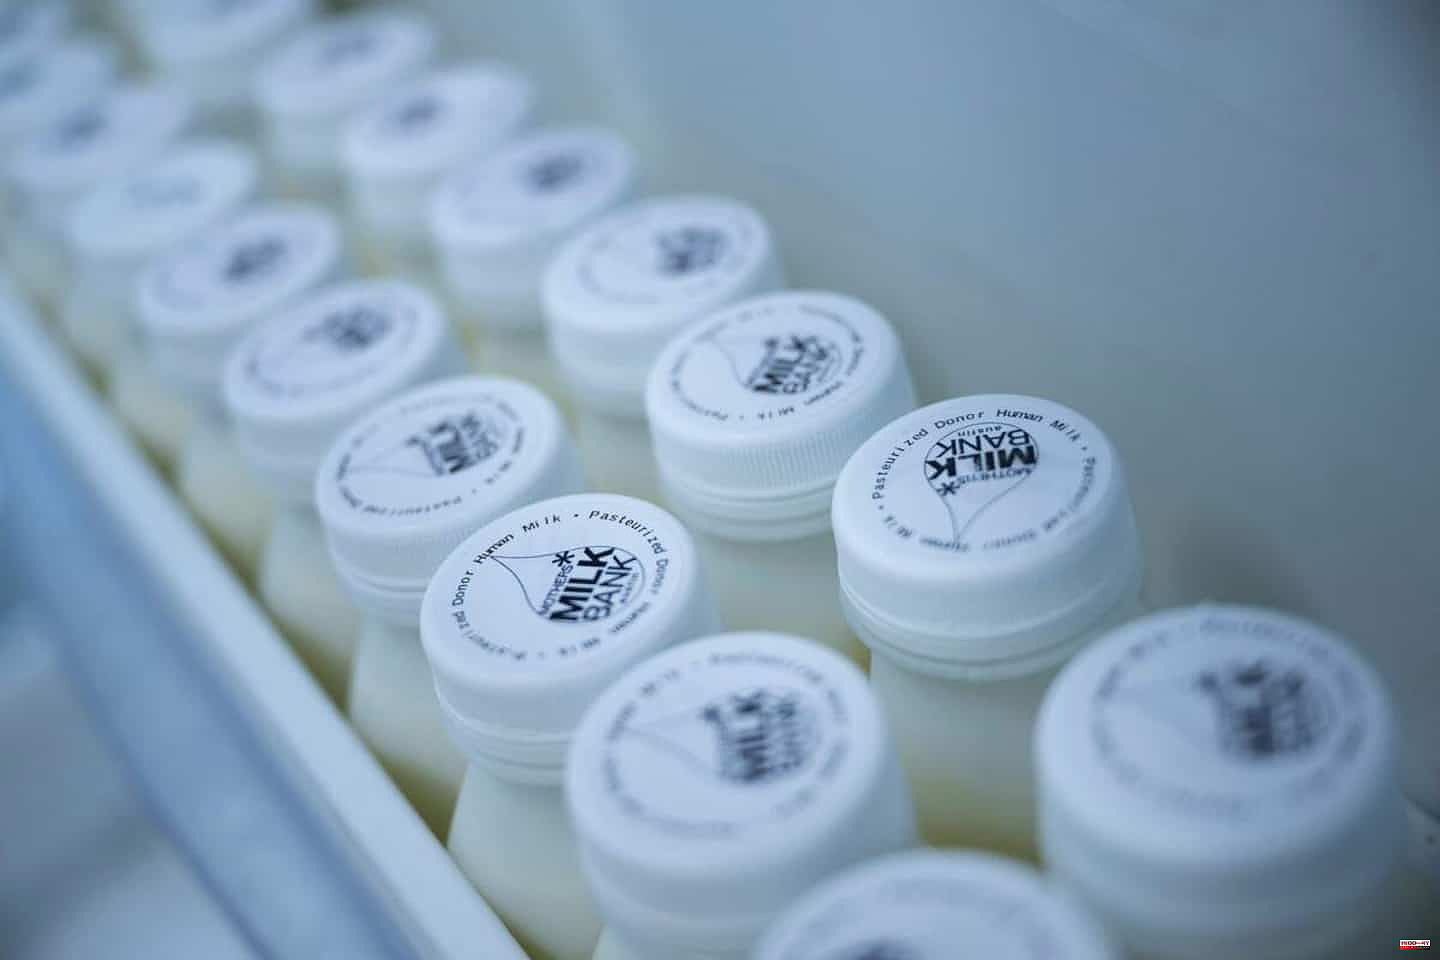 Formula milk: Ottawa is doing “everything it can” to avoid a shortage